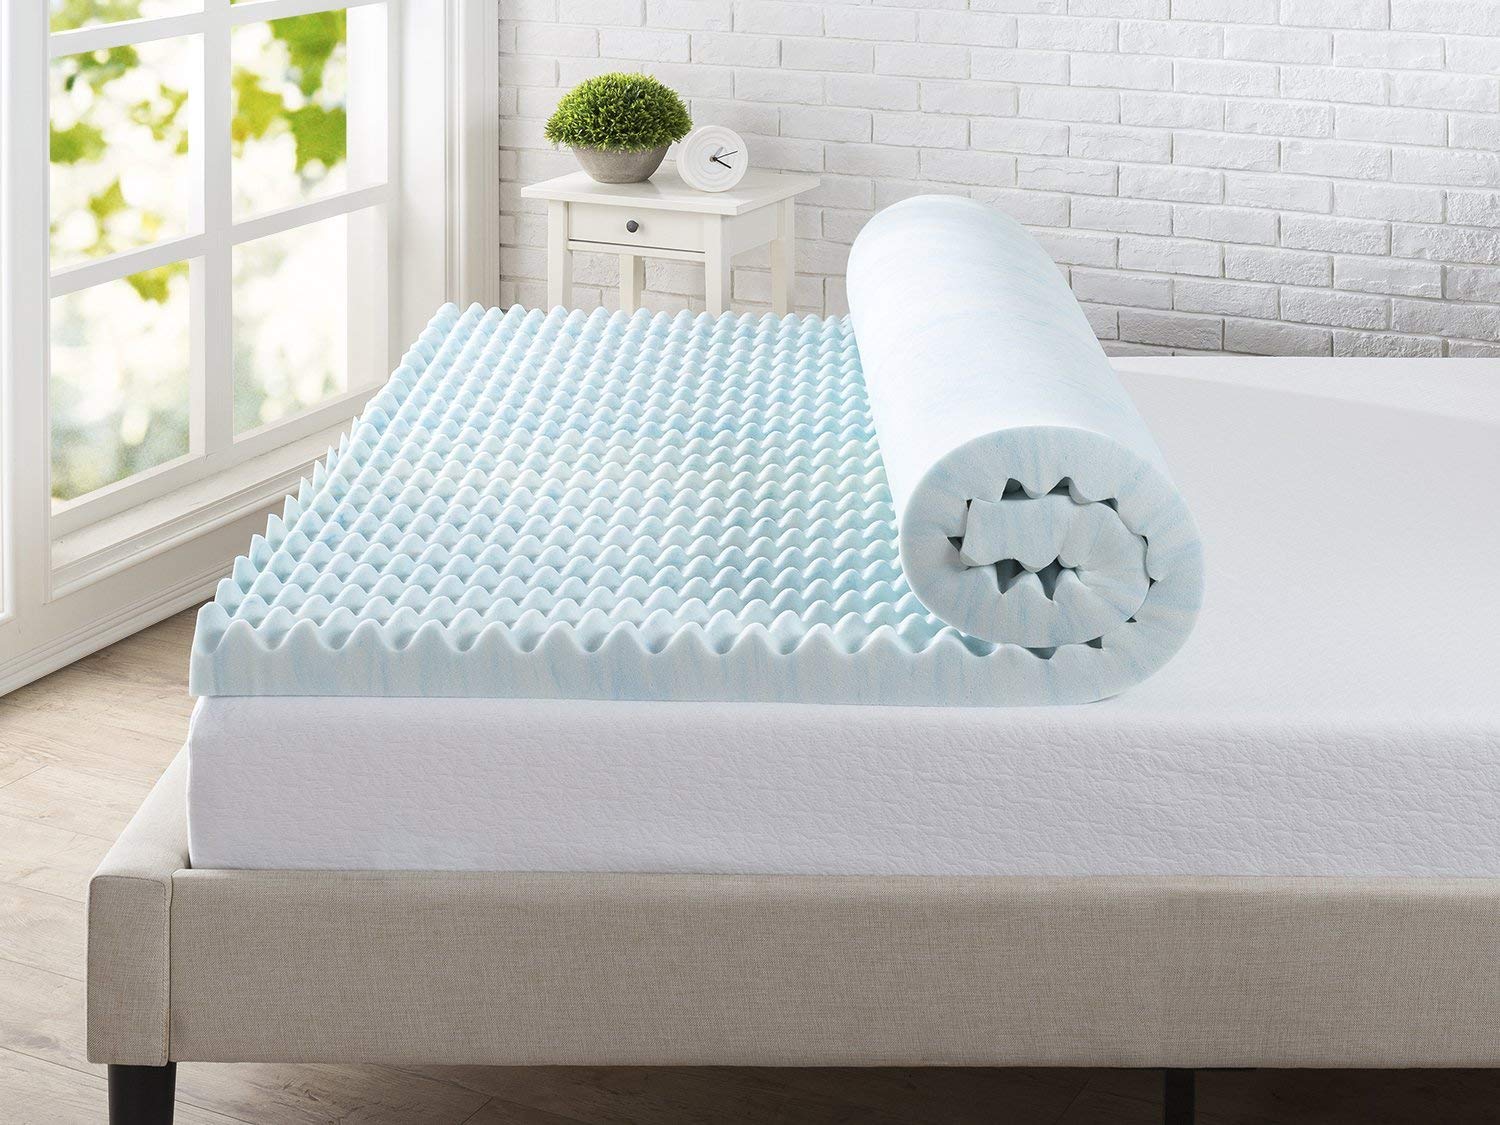 firm and cooling mattress topper